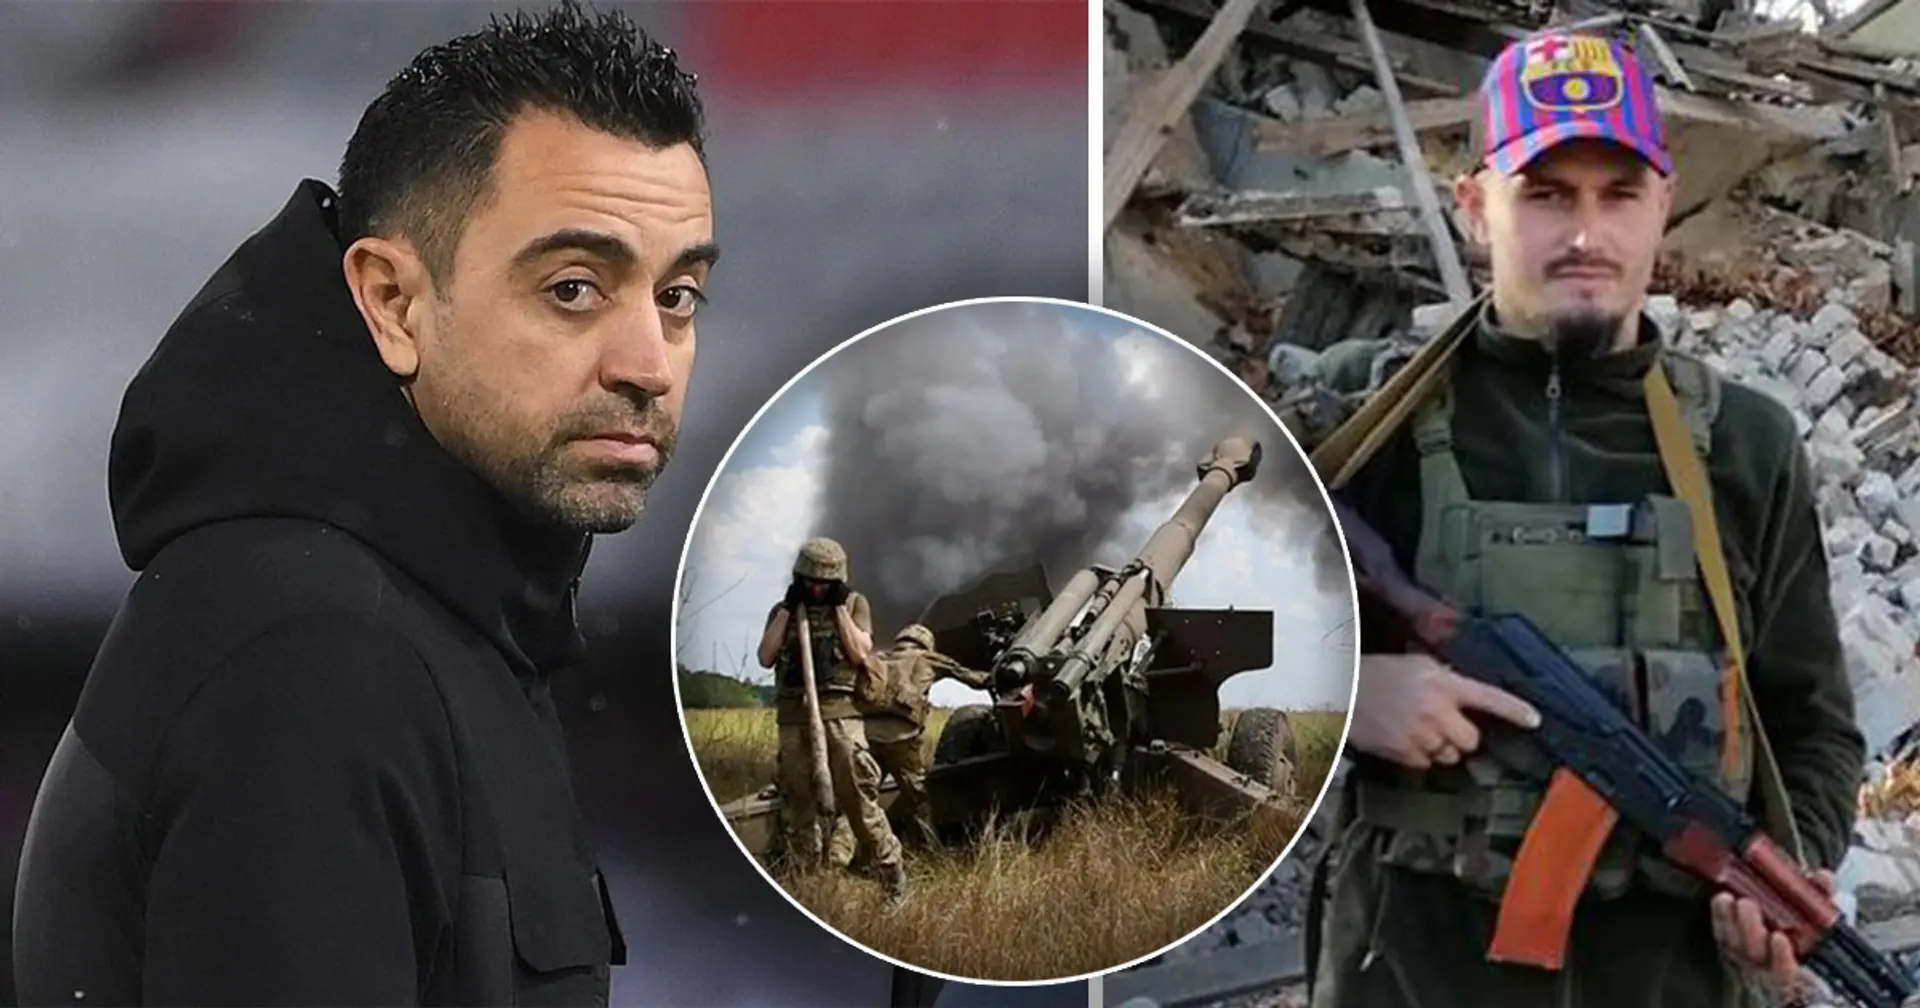 ‘Xavi would be a great artillerist in our army’: Ukrainian soldier and Barca fan talks about his beloved club - and asks for help